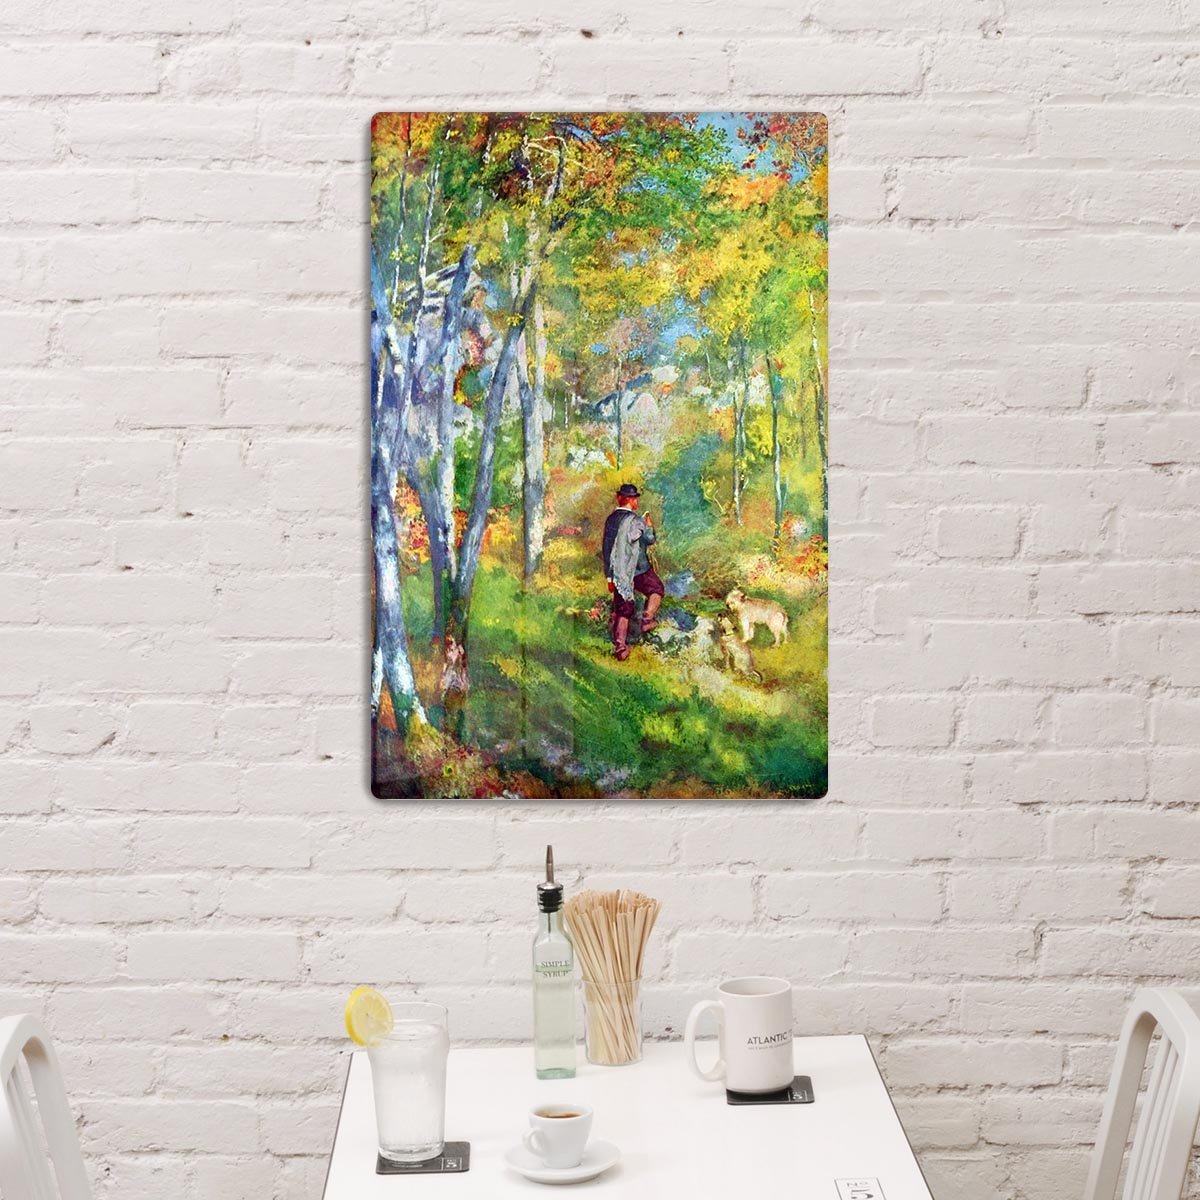 Young man in the forest of Fontainebleau by Renoir HD Metal Print